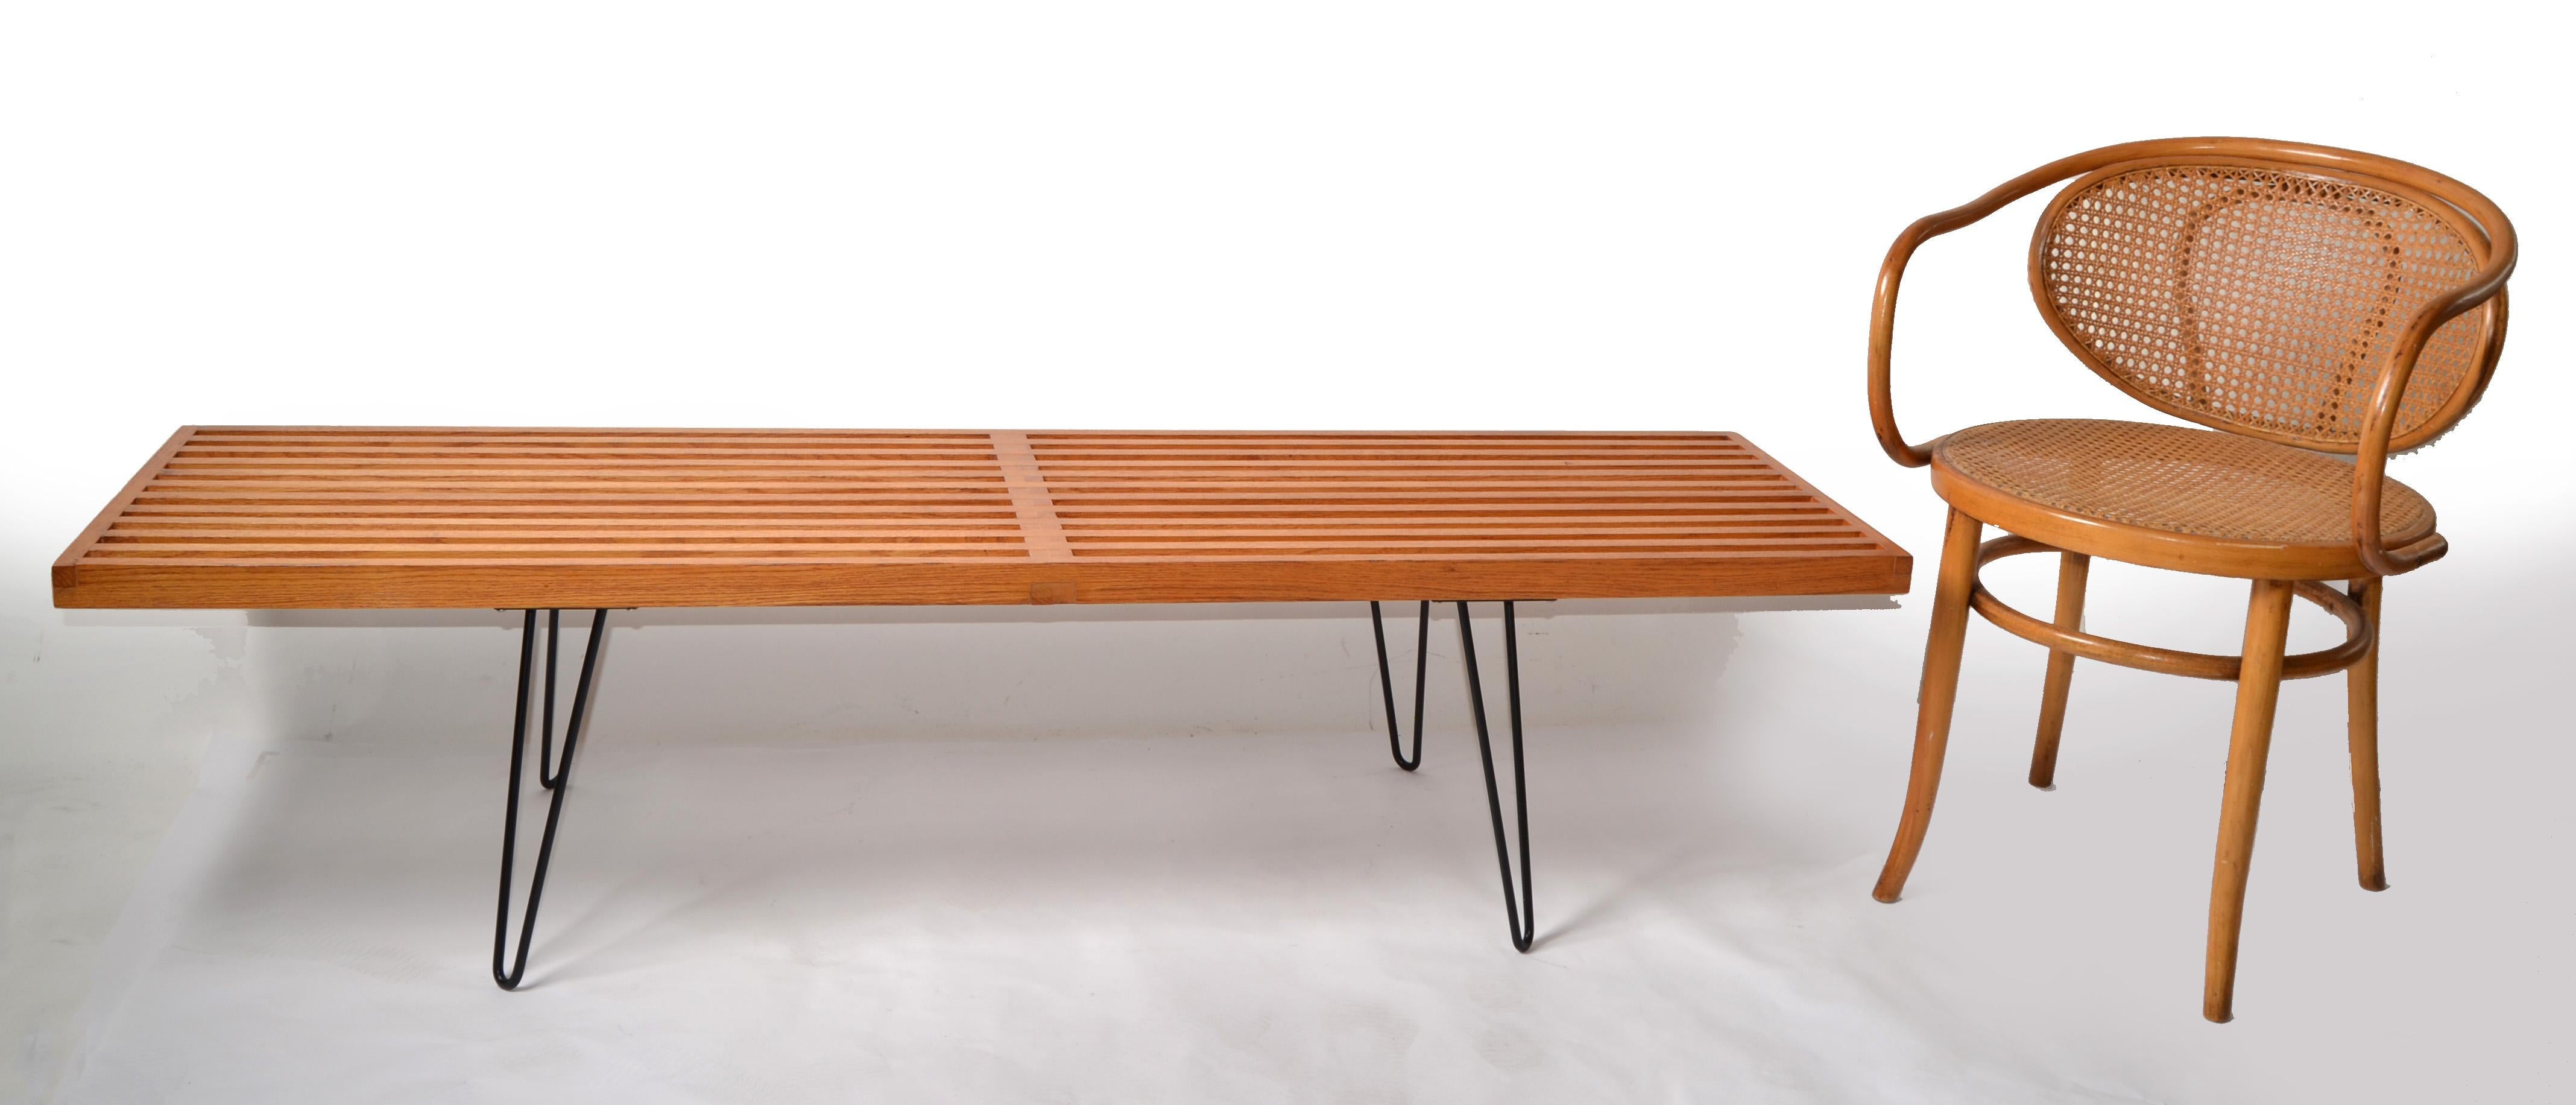 George Nelson Style Oak Slat Bench With Steel Hairpin Legs Attributed to Knoll For Sale 2